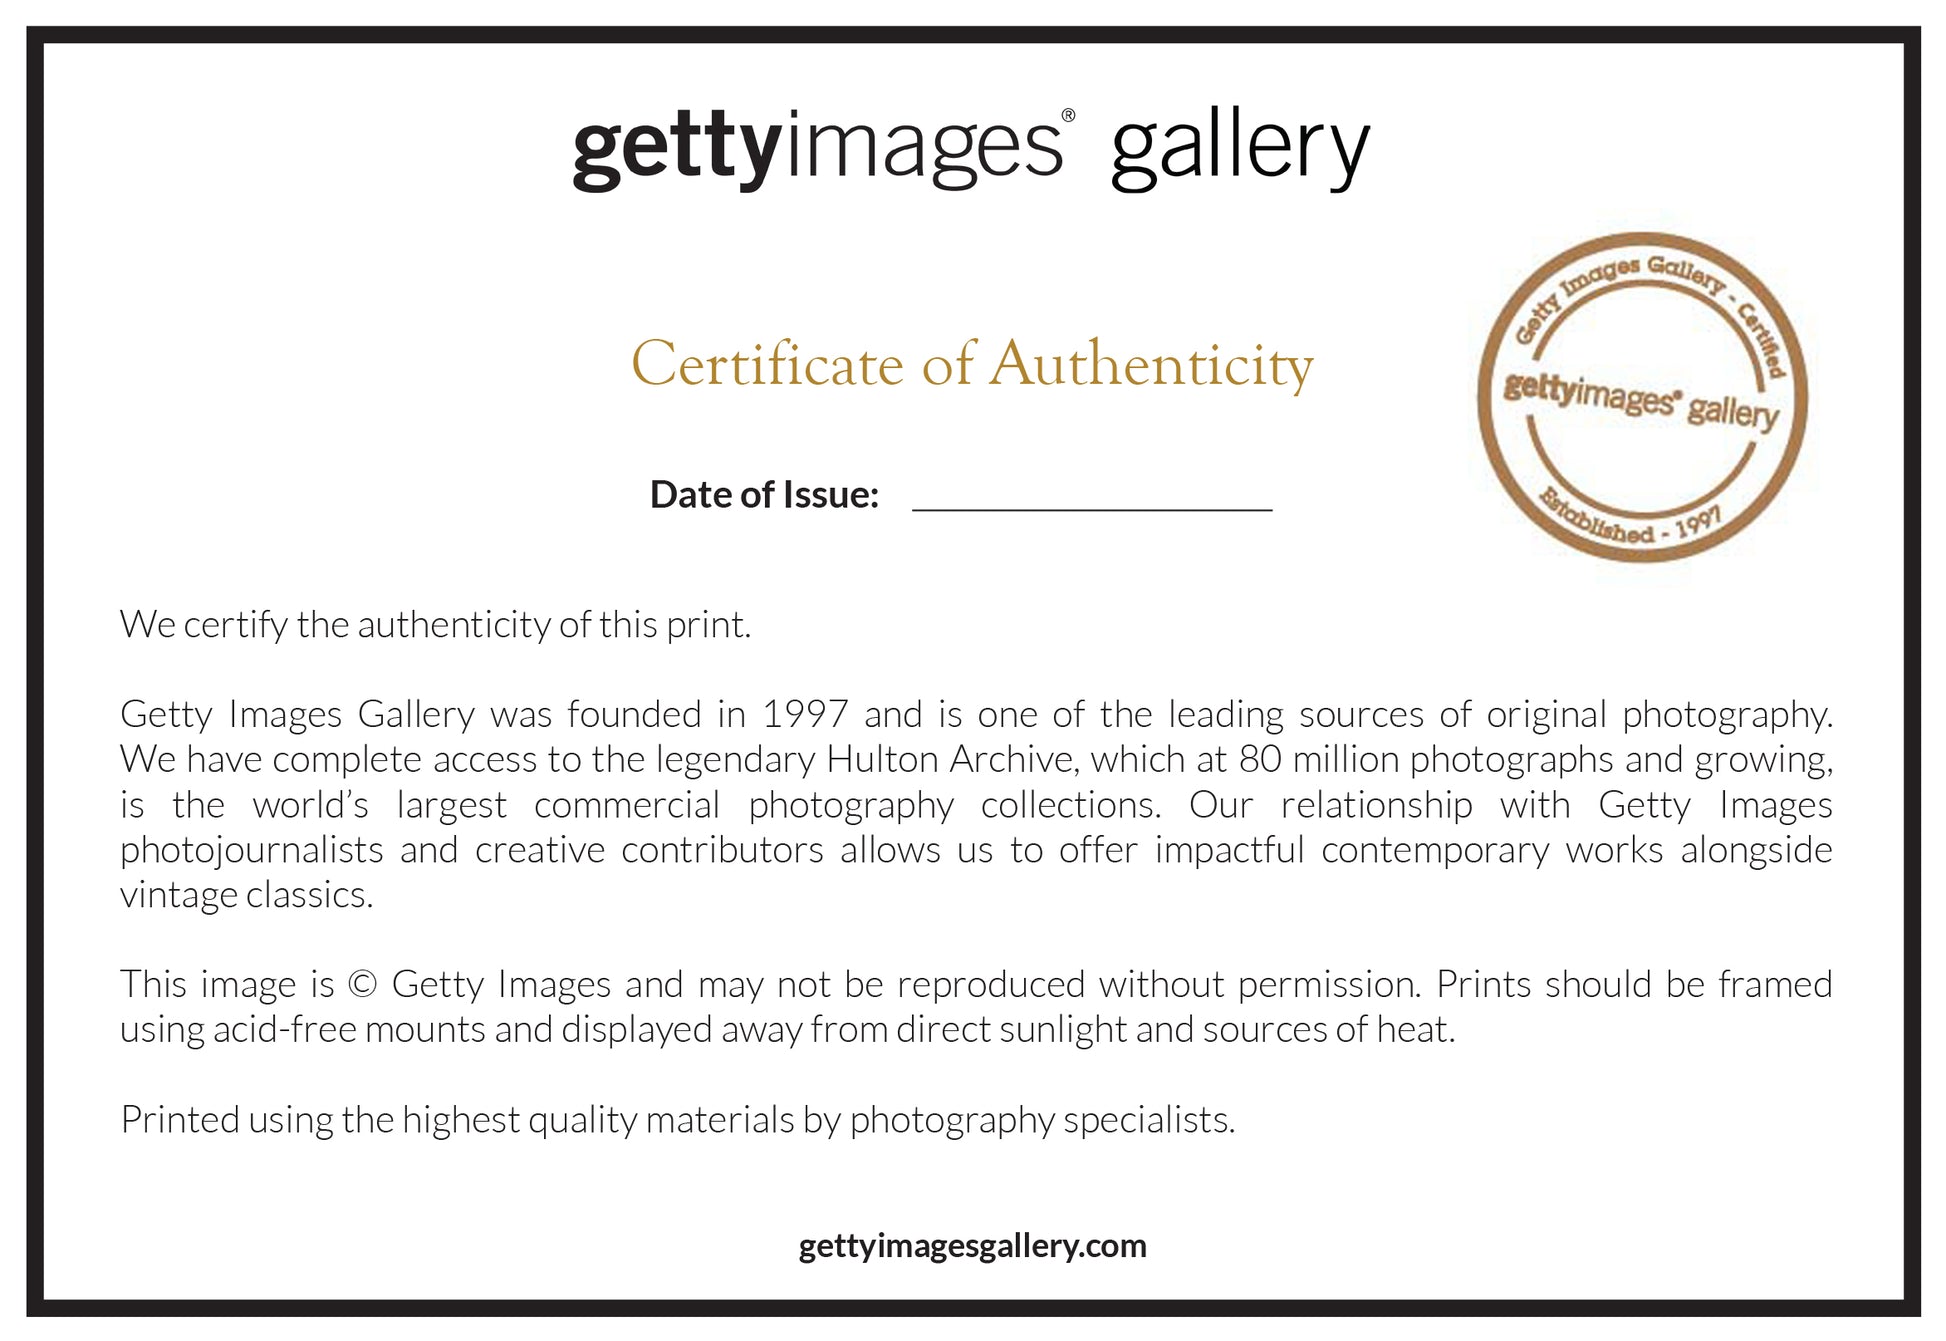 Getty Gallery certificate of authenticity